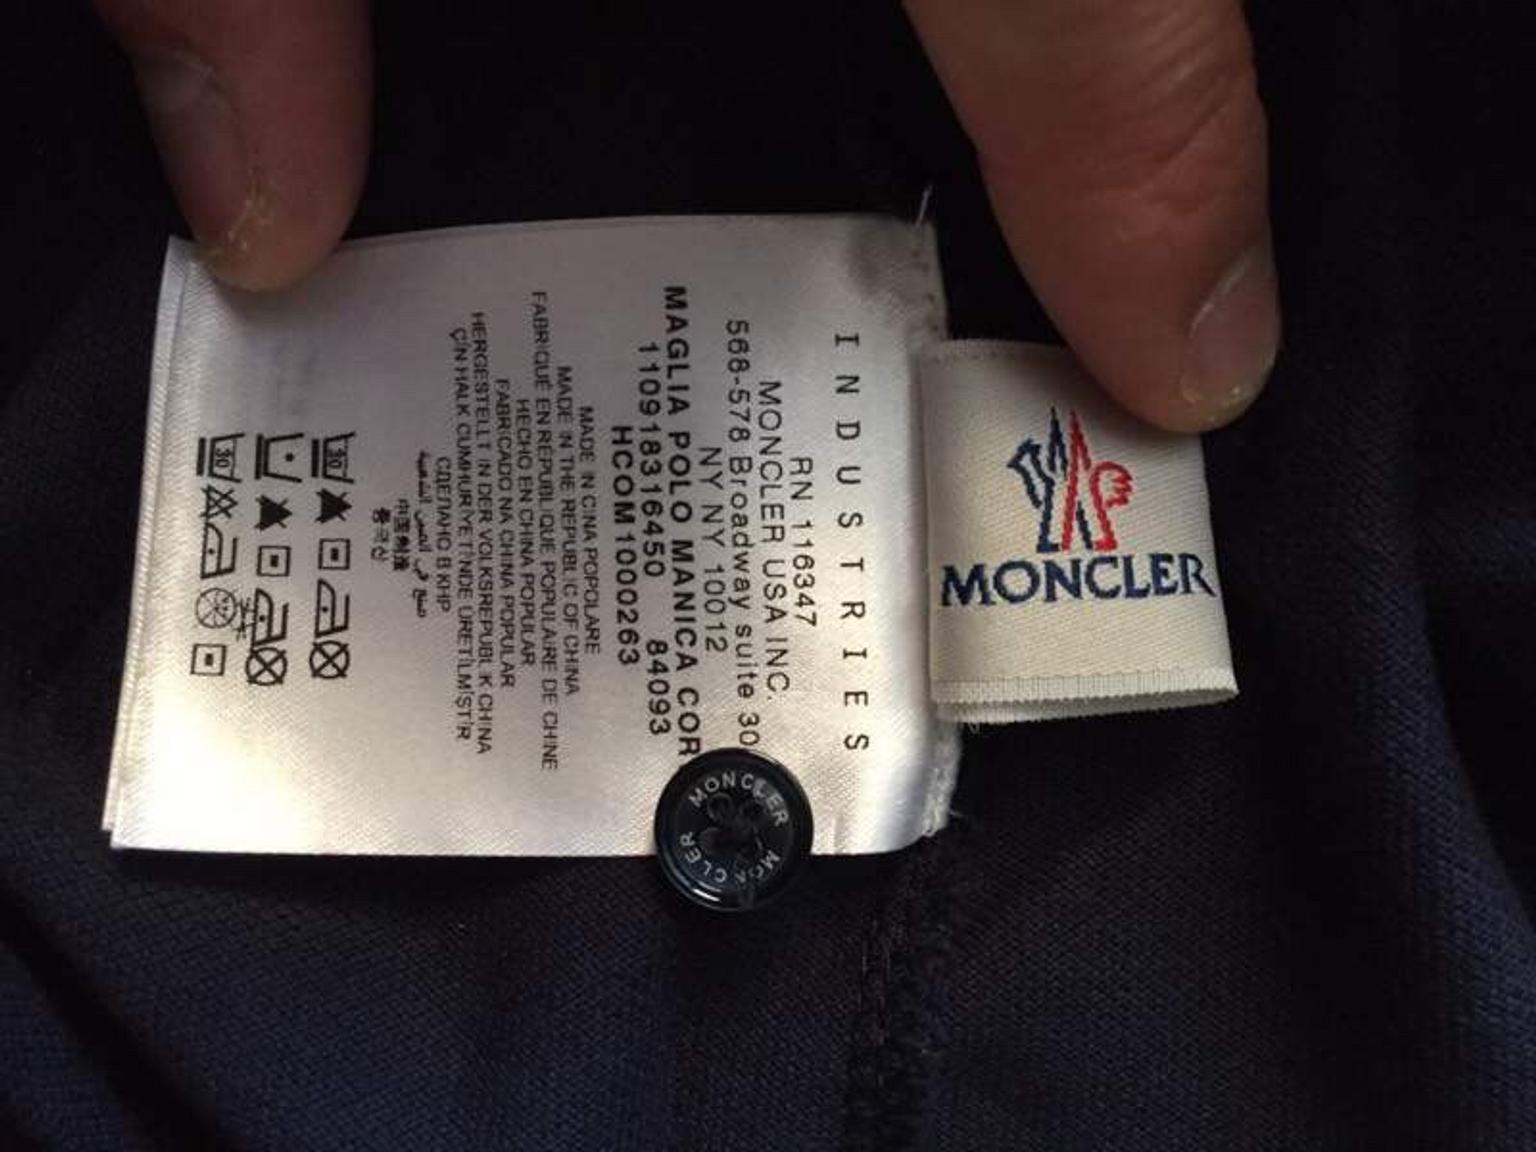 moncler made in china